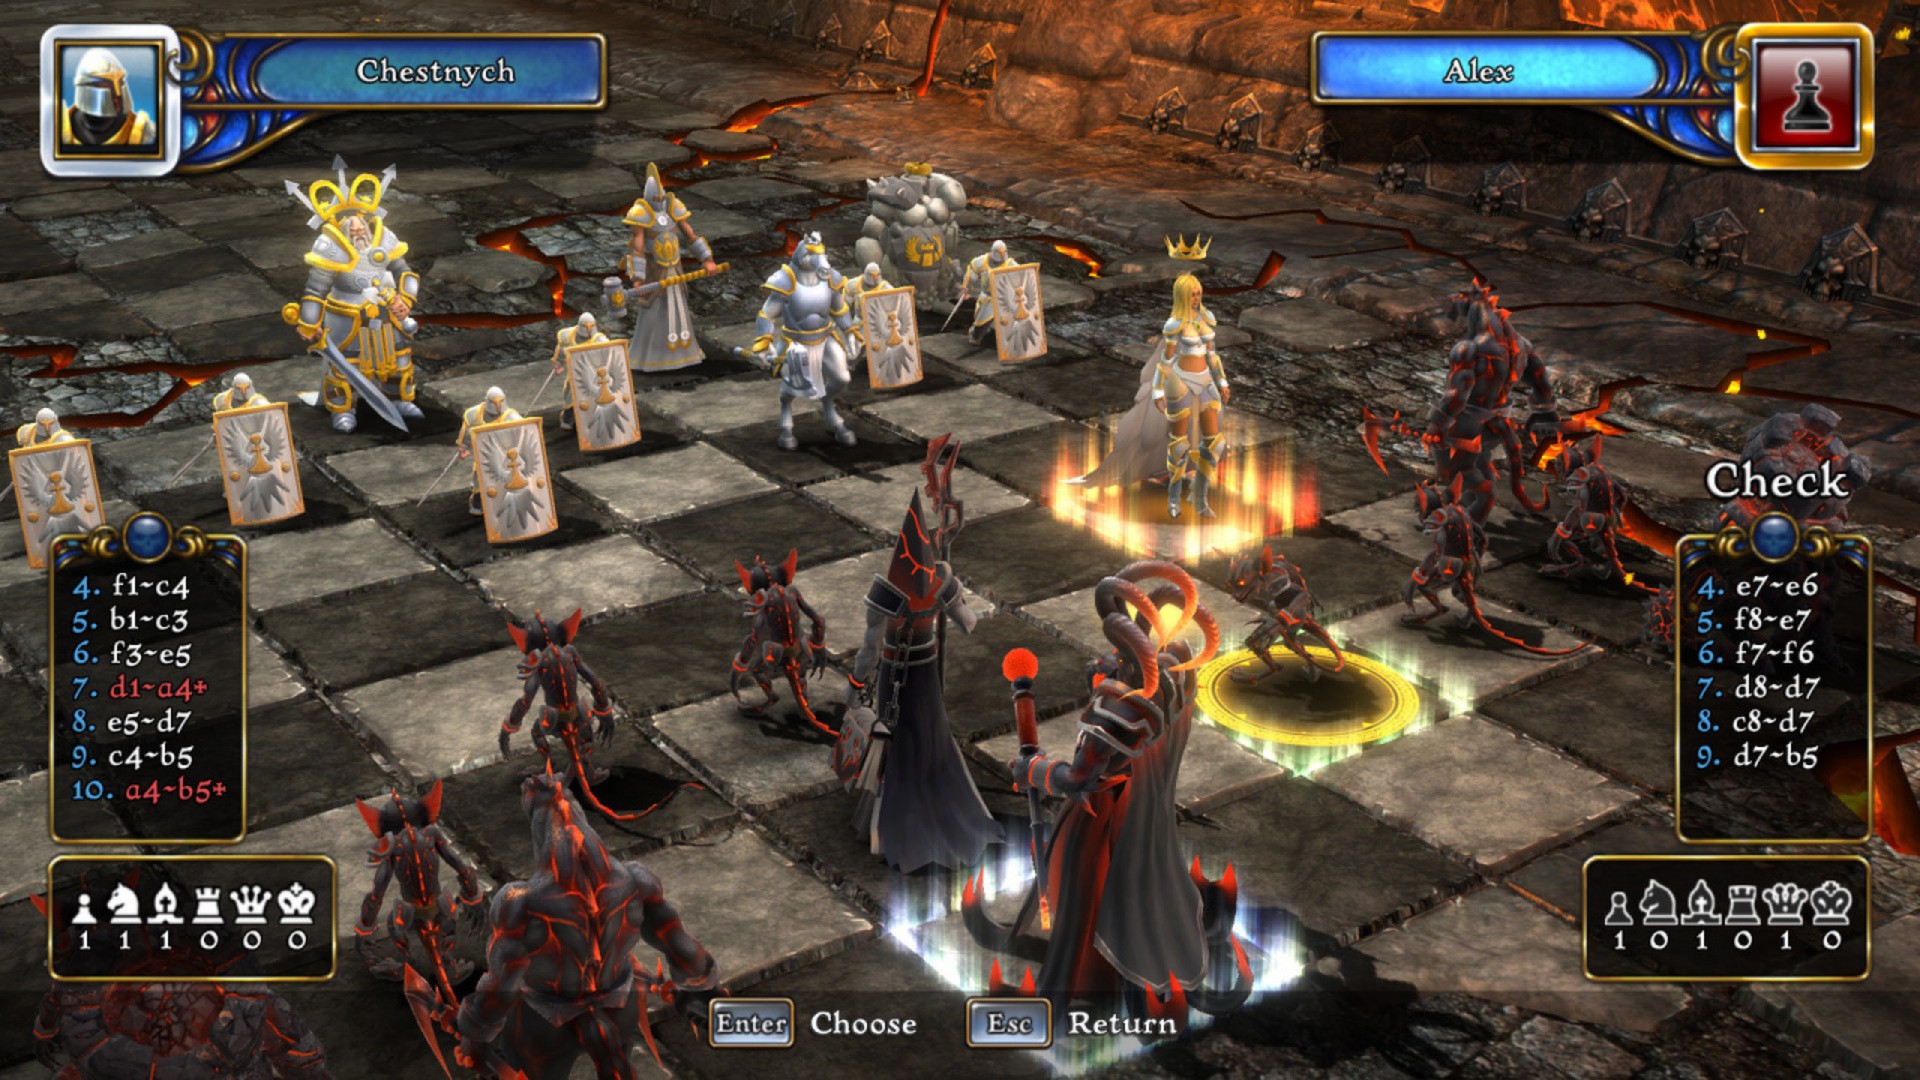 battle vs chess game android